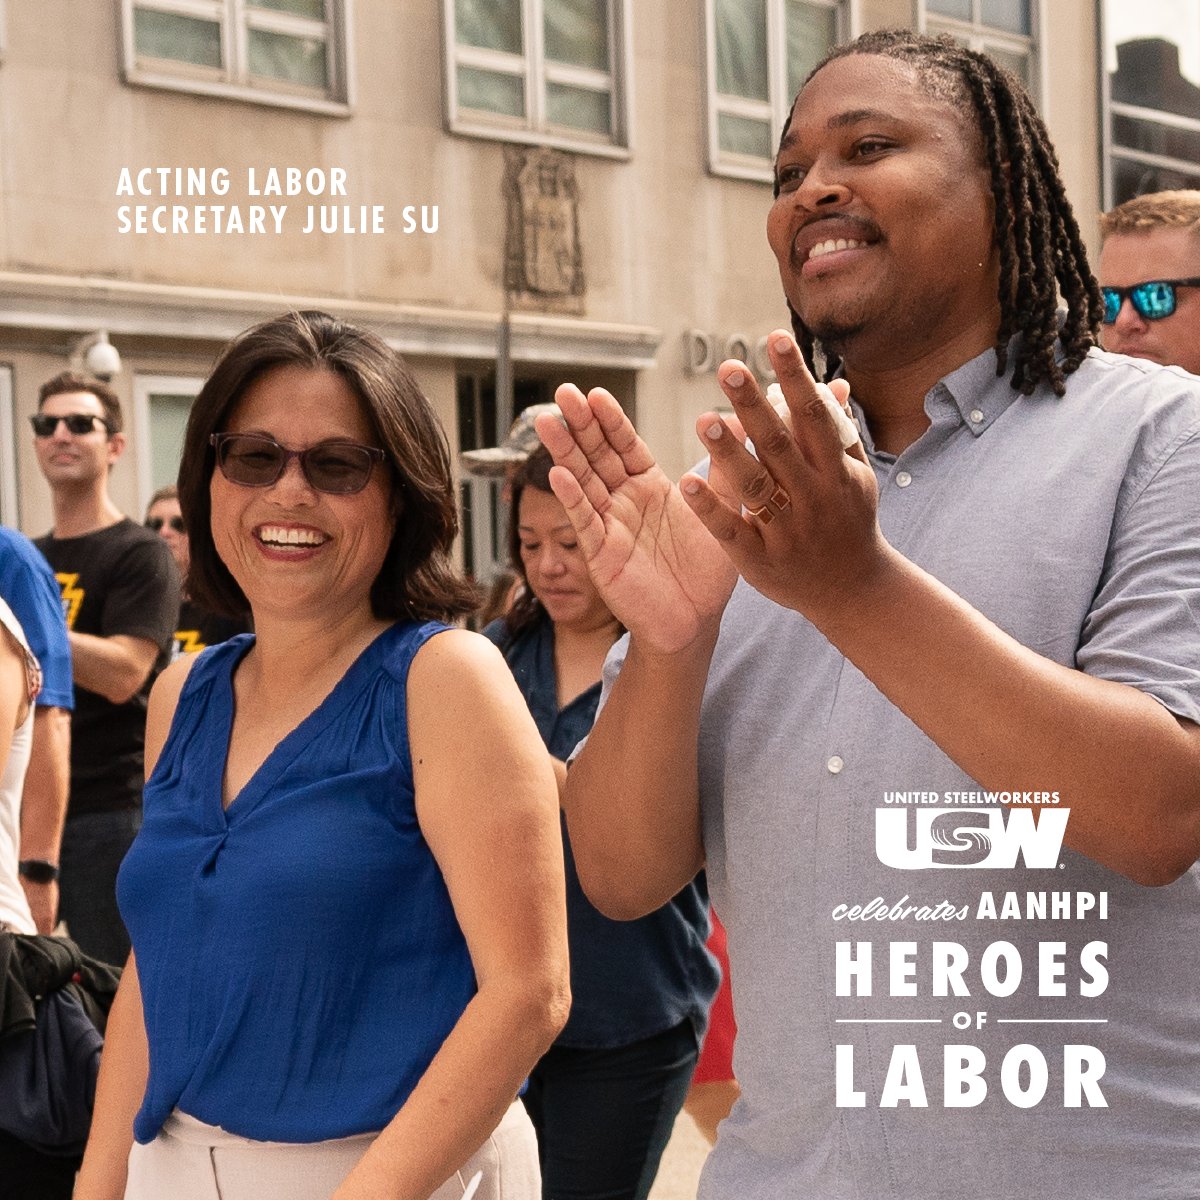 The USW is proud to celebrate Asian American, Native Hawaiian and Pacific Islander Heritage Month this May by highlighting the work of our #AANHPI labor heroes. One of those is acting Labor Secretary Julie Su who has spent her career fighting for justice for vulnerable workers.